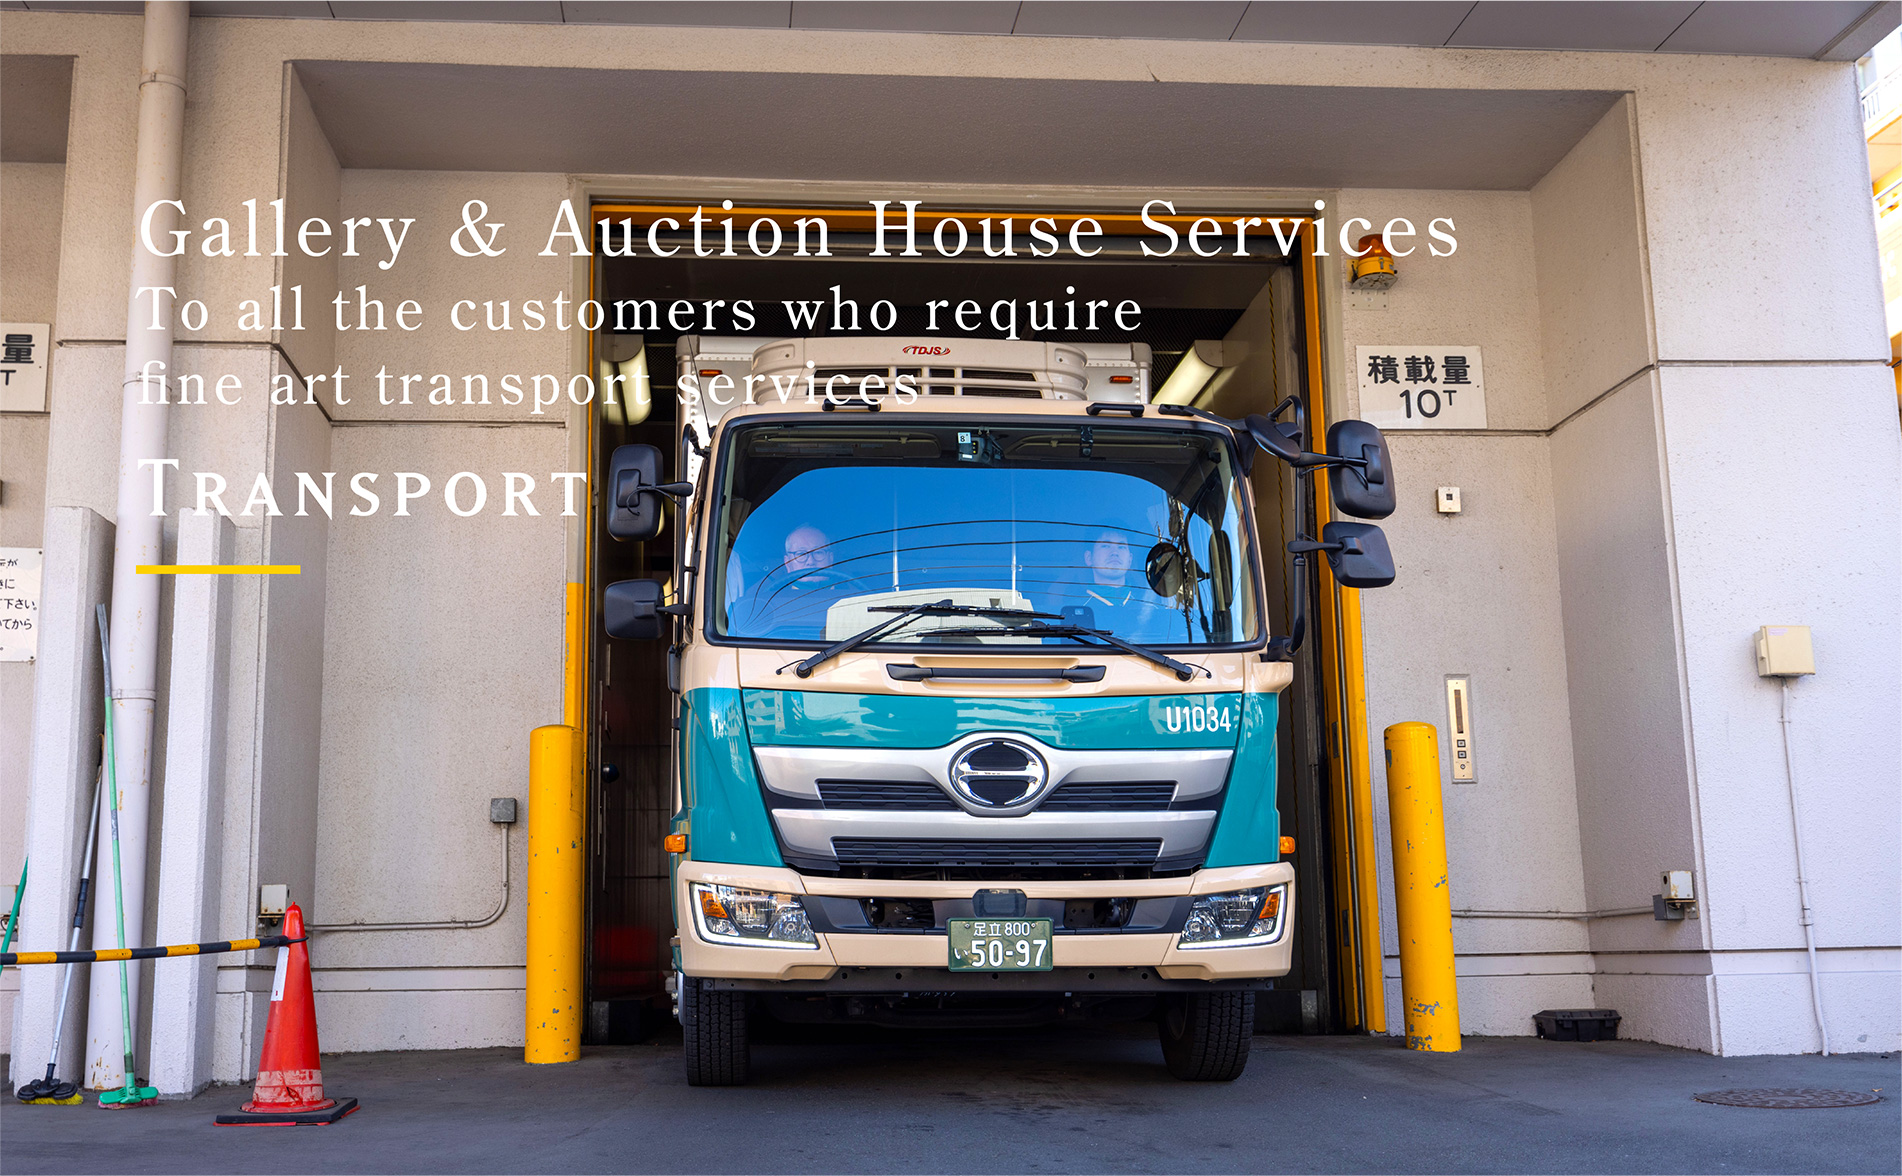 Gallery and Auction House Services - TRANSPORT